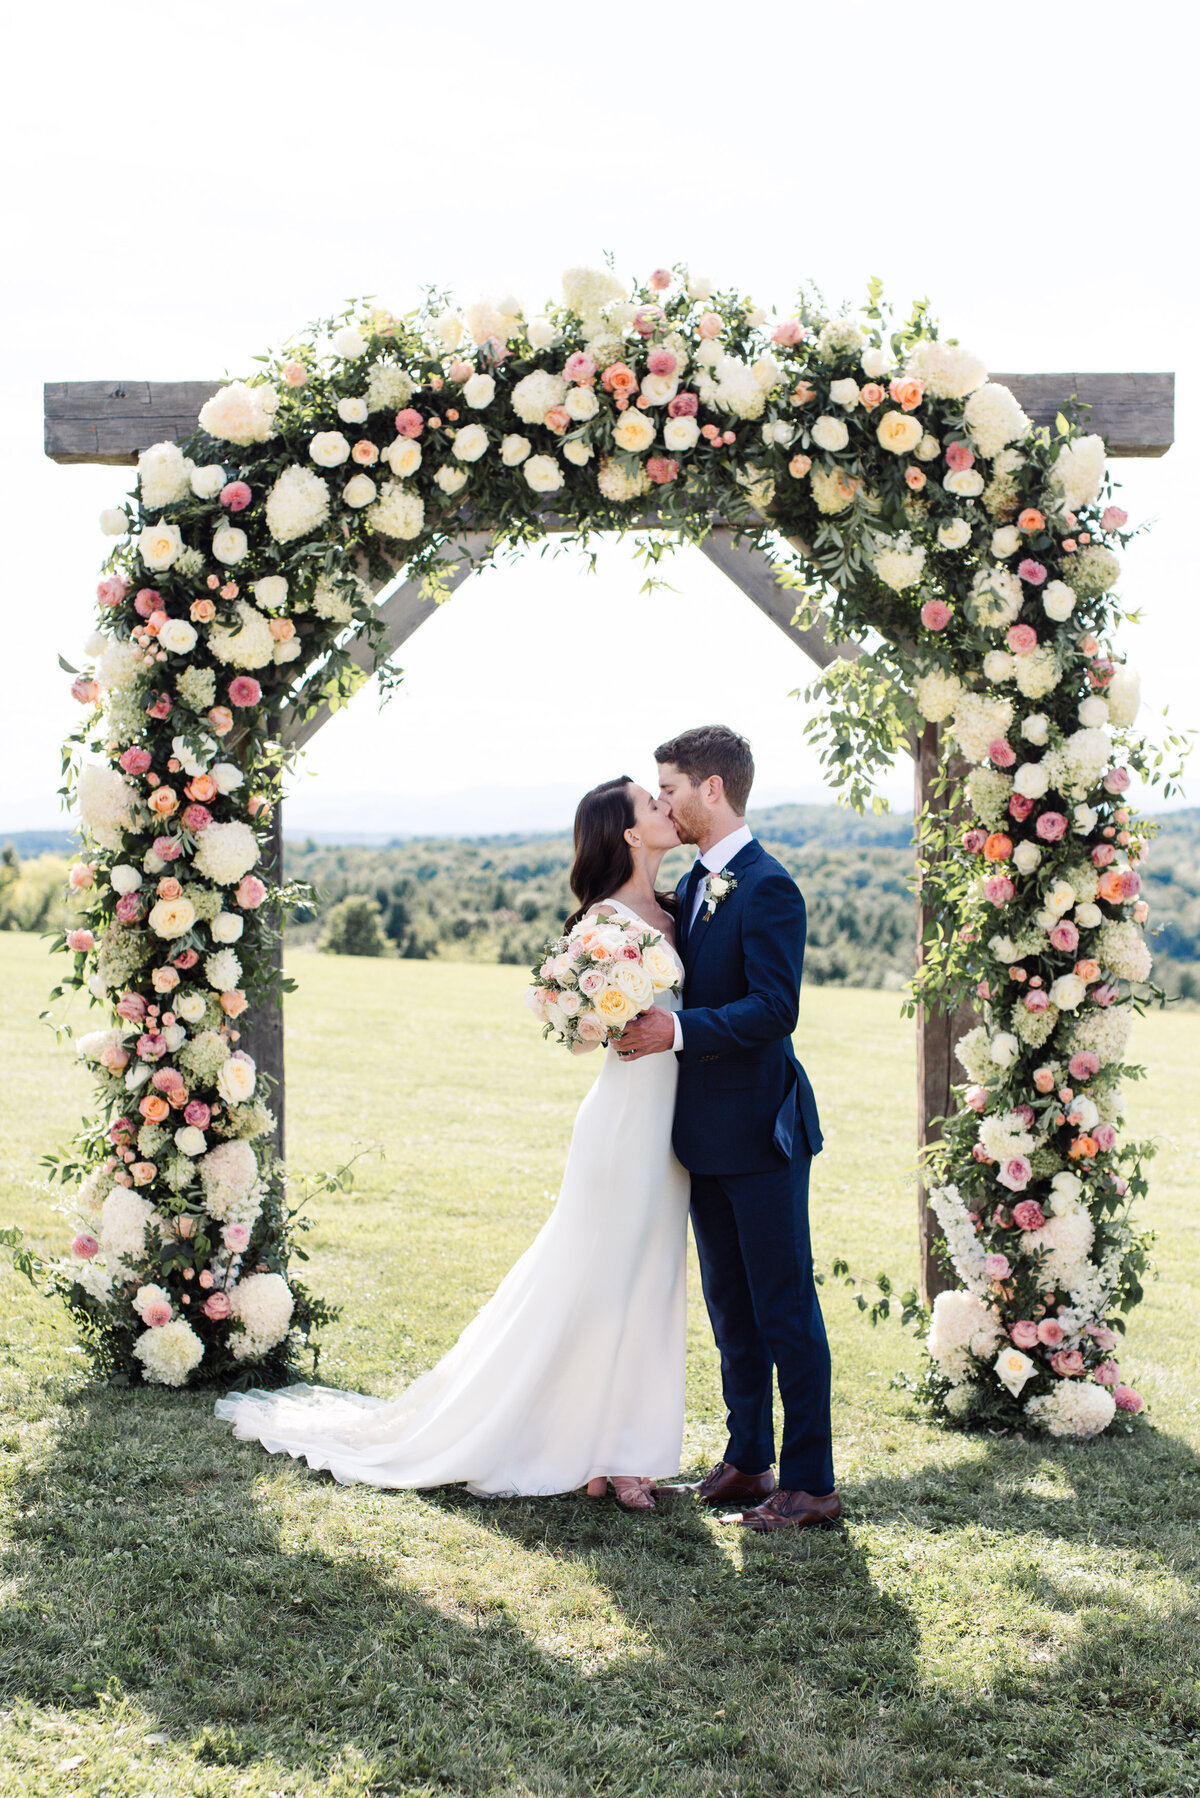 Fabulous wedding arch by Clayton Floral at Maquam Barn and Winery in Vermont